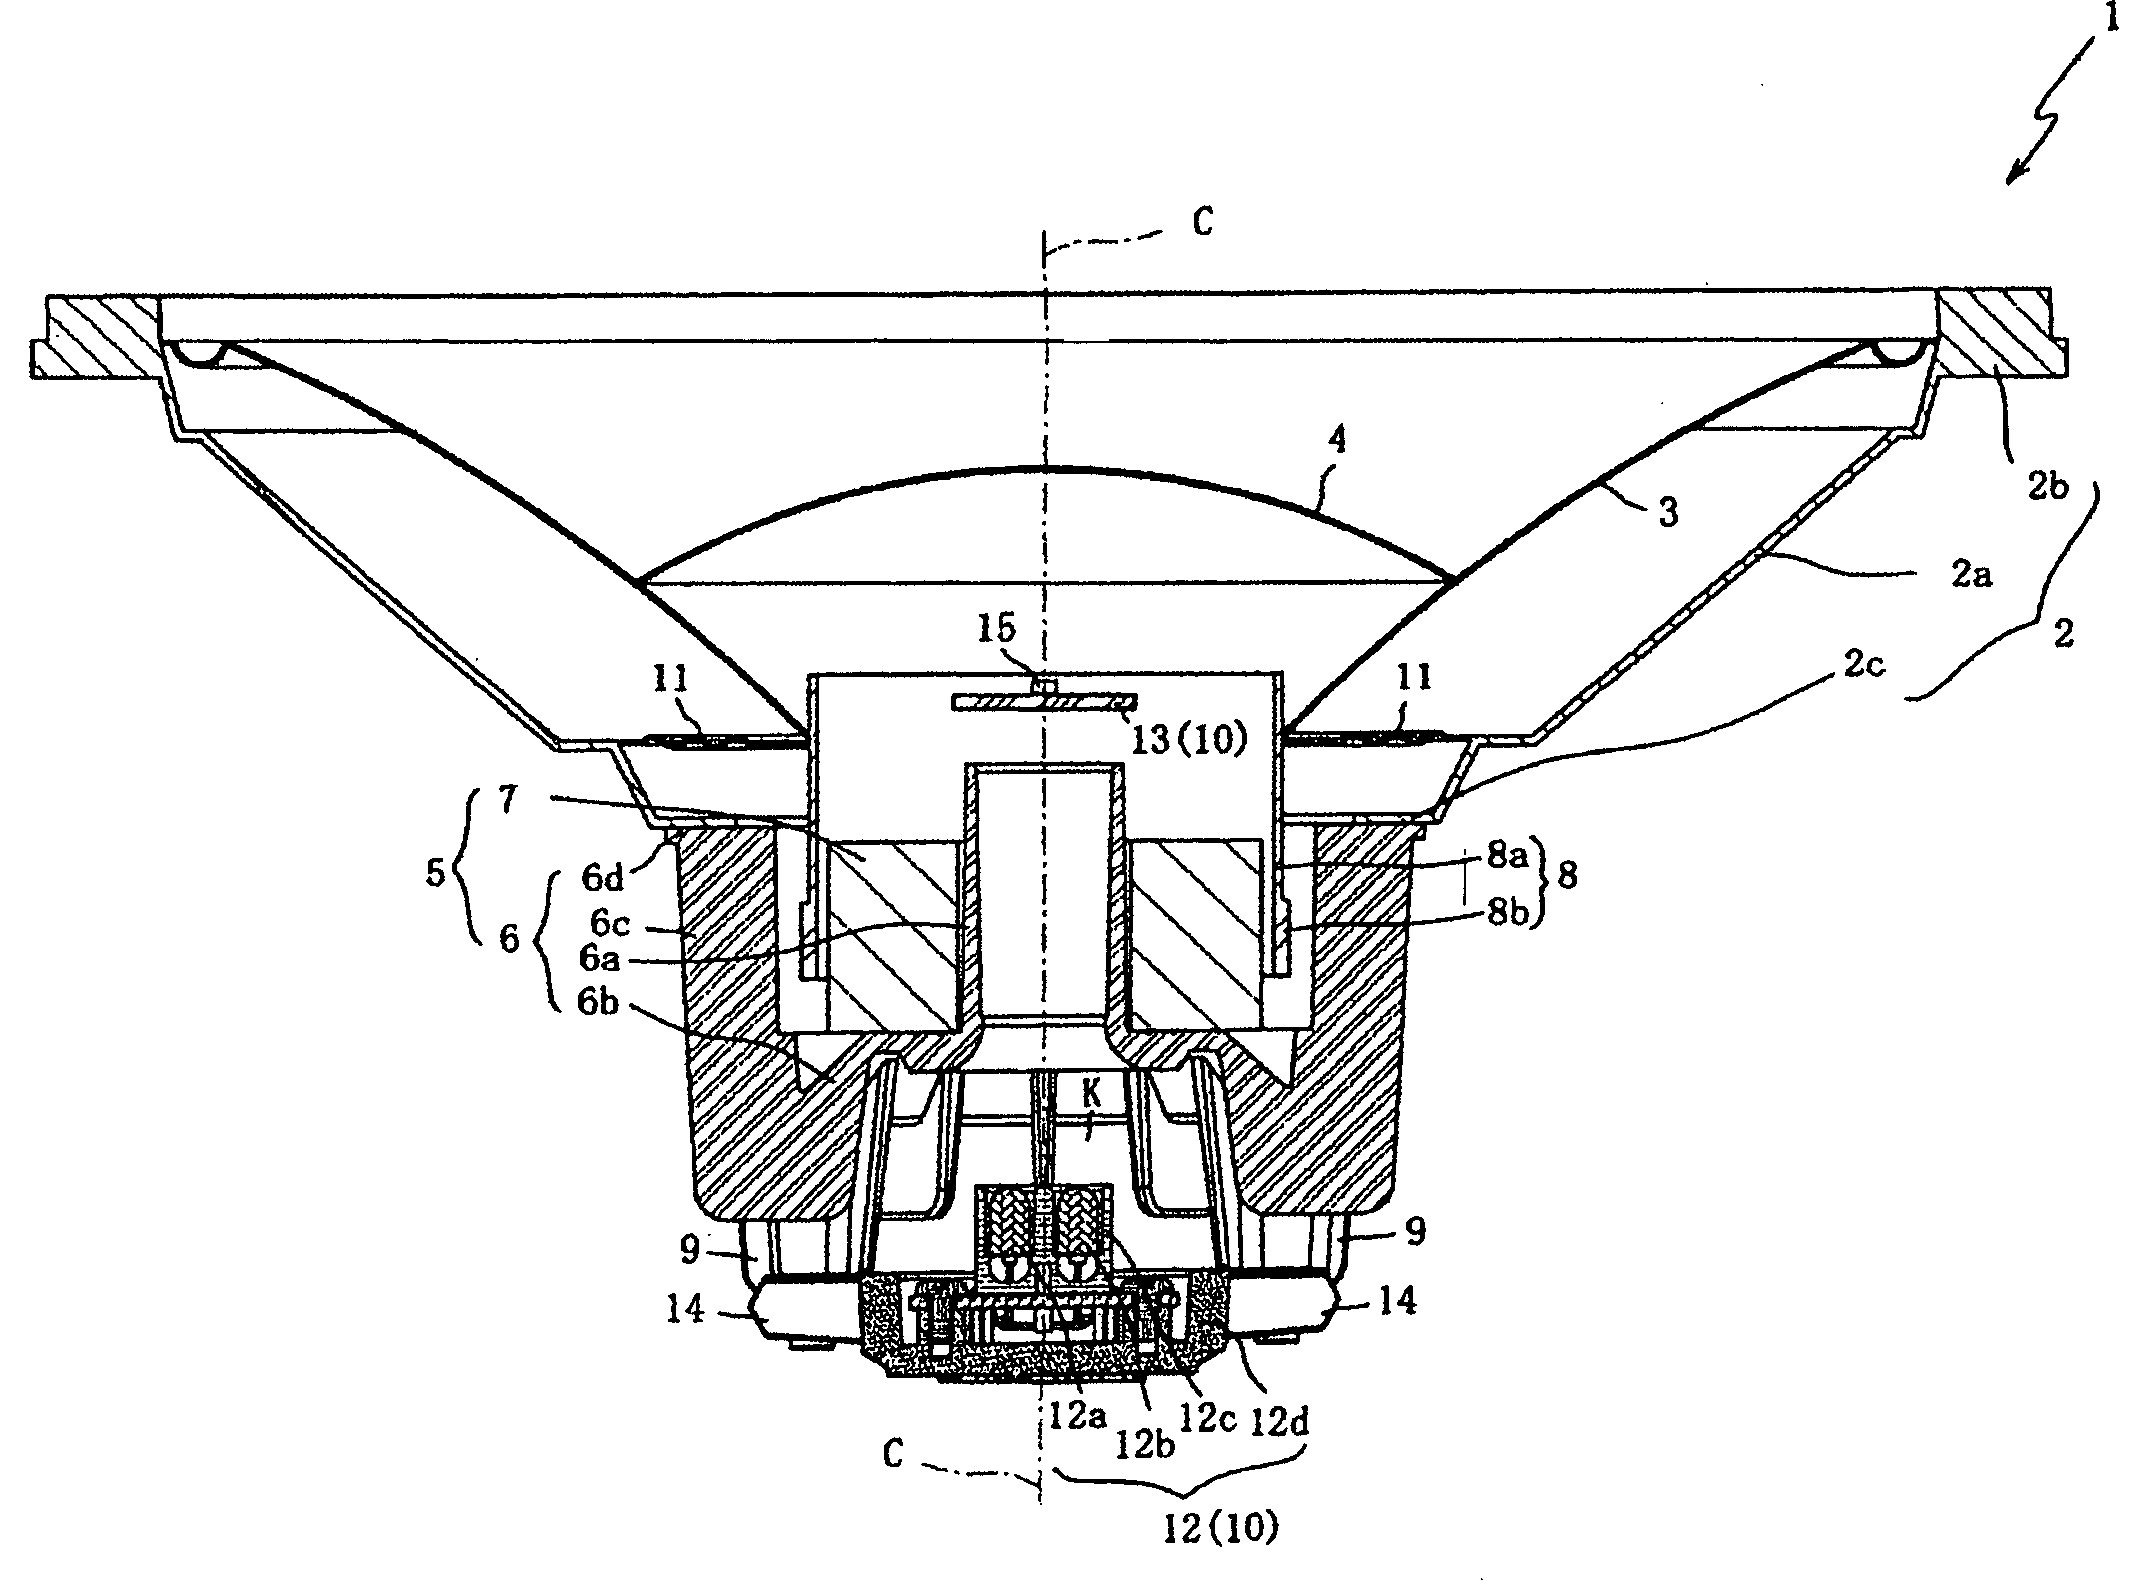 Speaker system with oscillation detection unit